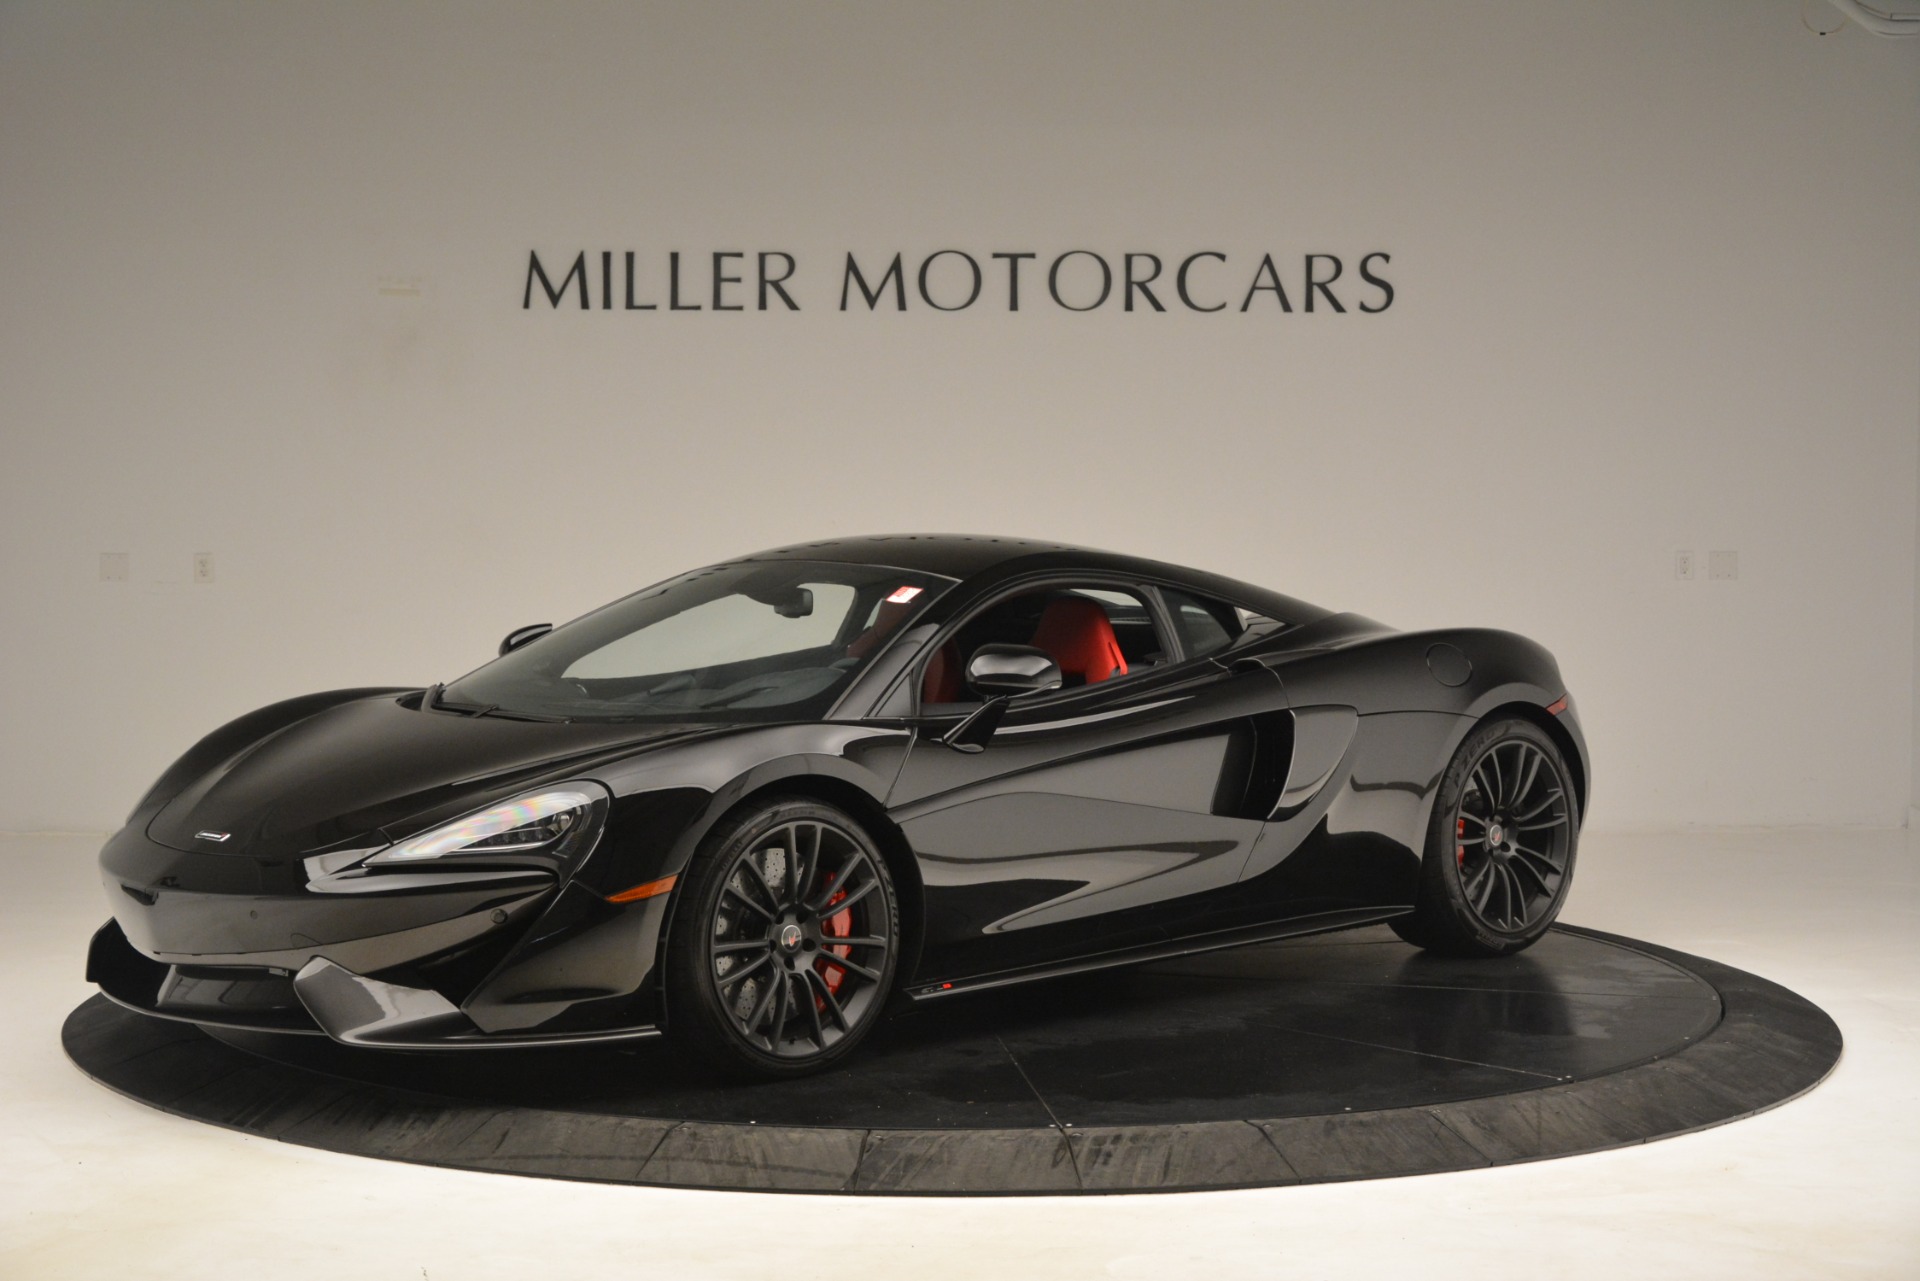 Used 2016 McLaren 570S Coupe for sale Sold at Bentley Greenwich in Greenwich CT 06830 1